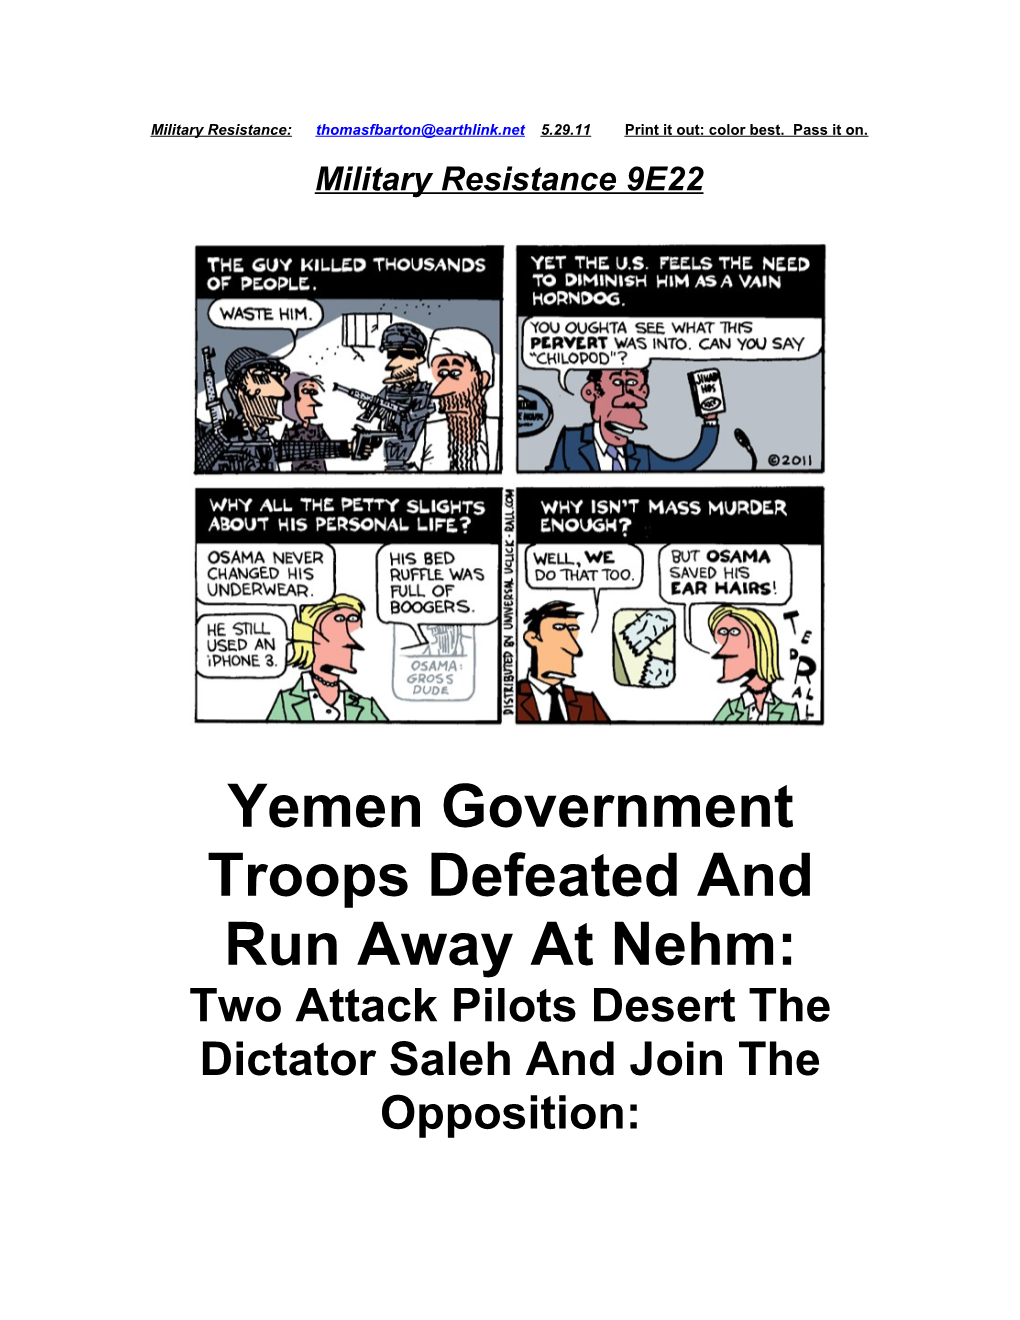 Yemen Government Troops Defeated and Run Away at Nehm